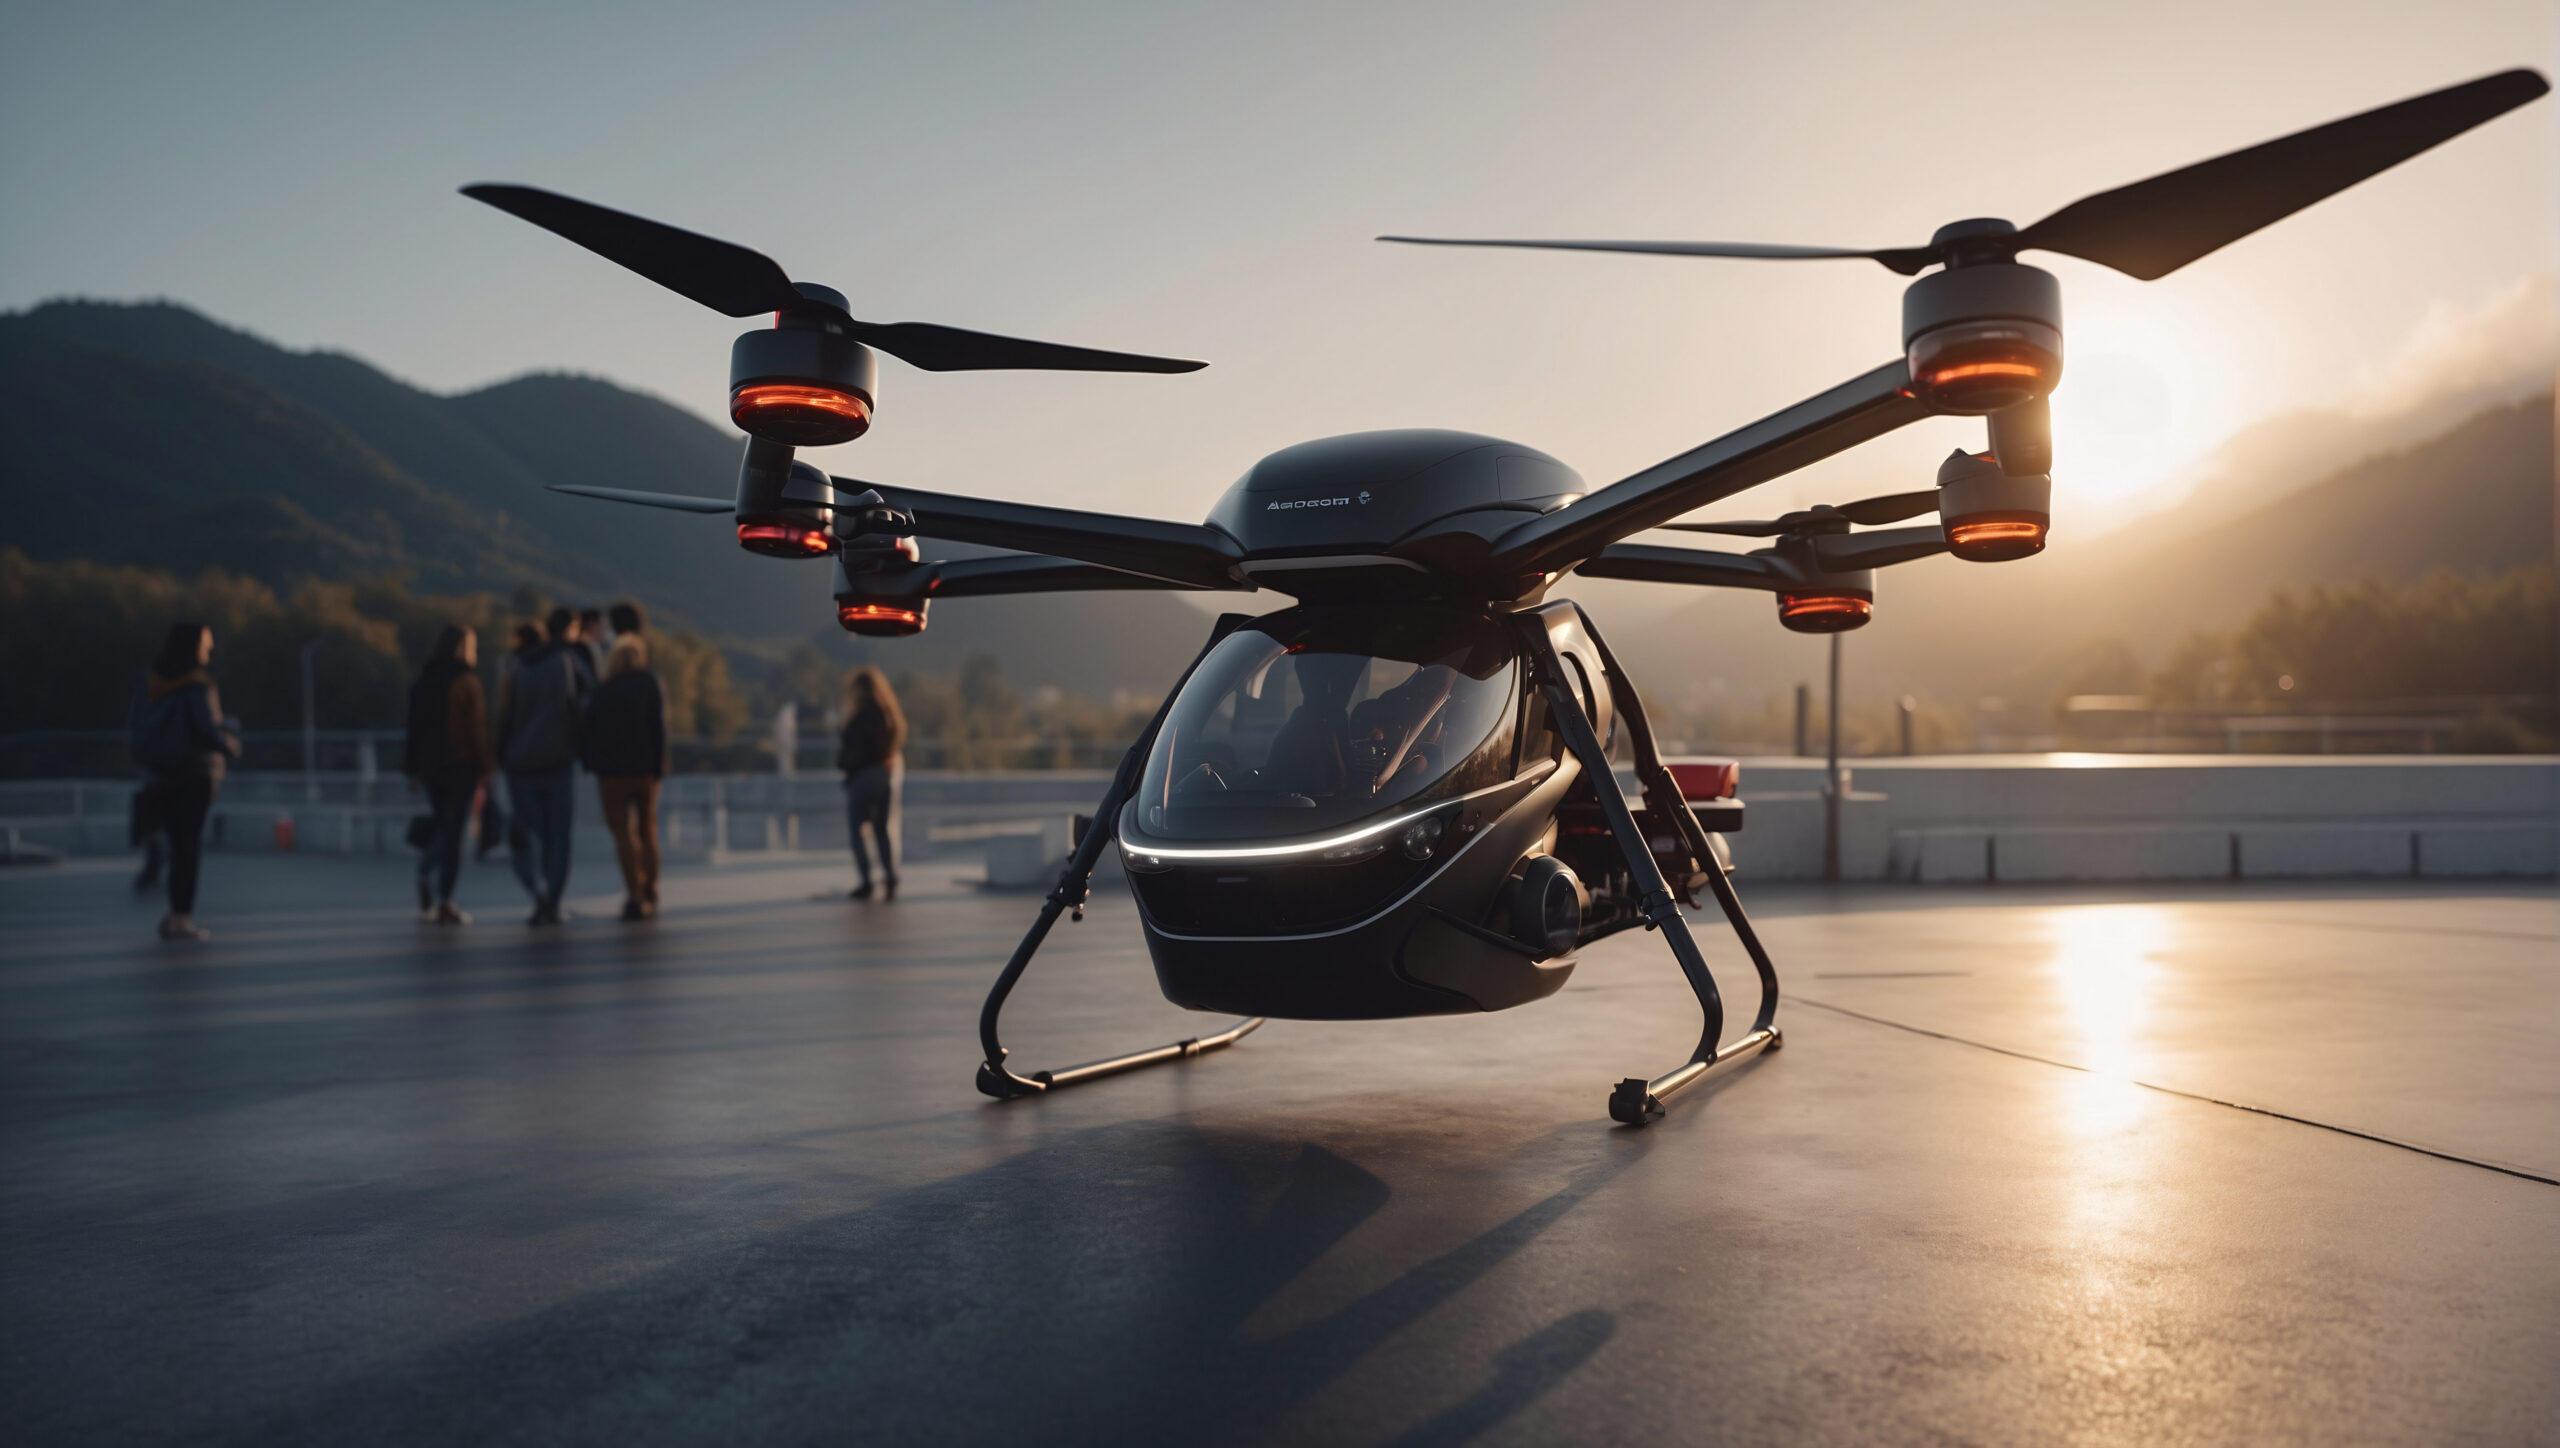 One of the most promising developments in the automotive industry is the autonomous VTOL flying taxi, designed for passenger transportation in the future